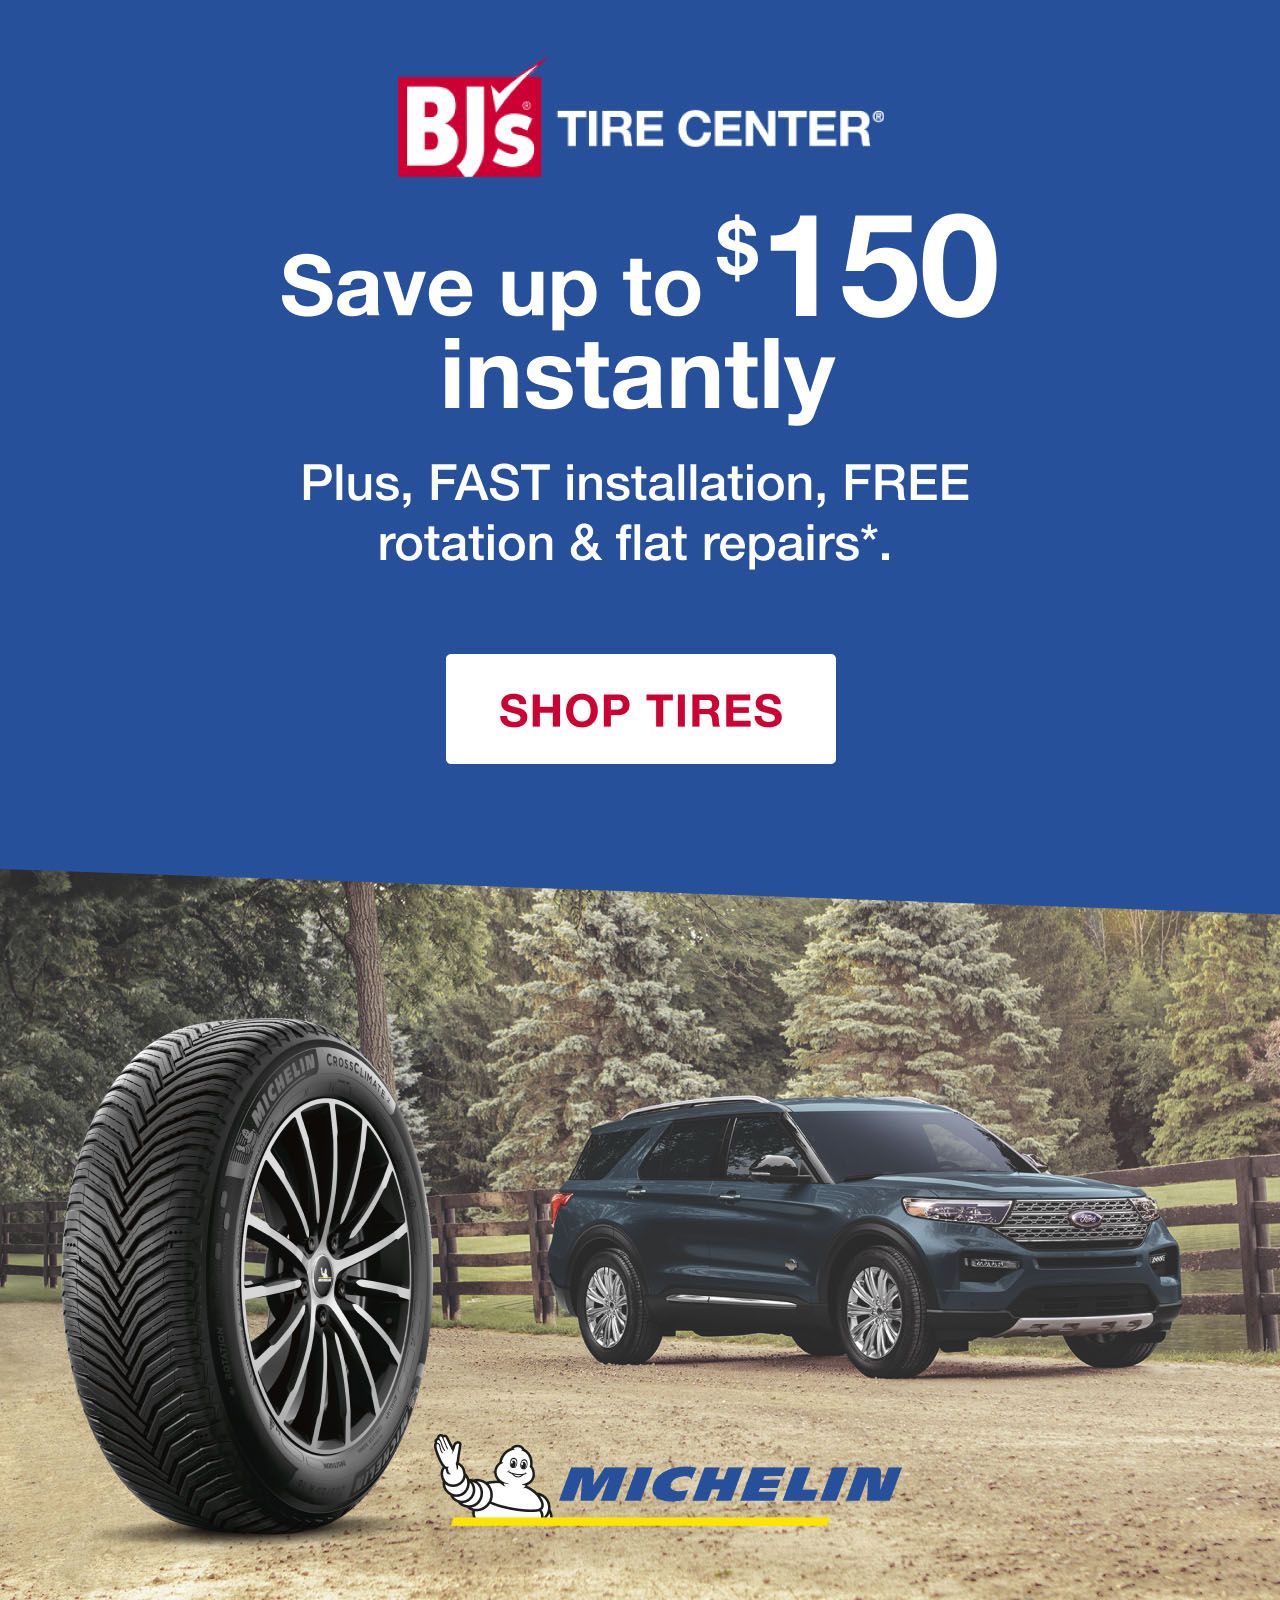 BJs Tire Center. Michelin. Save up to $150 instantly. Click to shop tires.